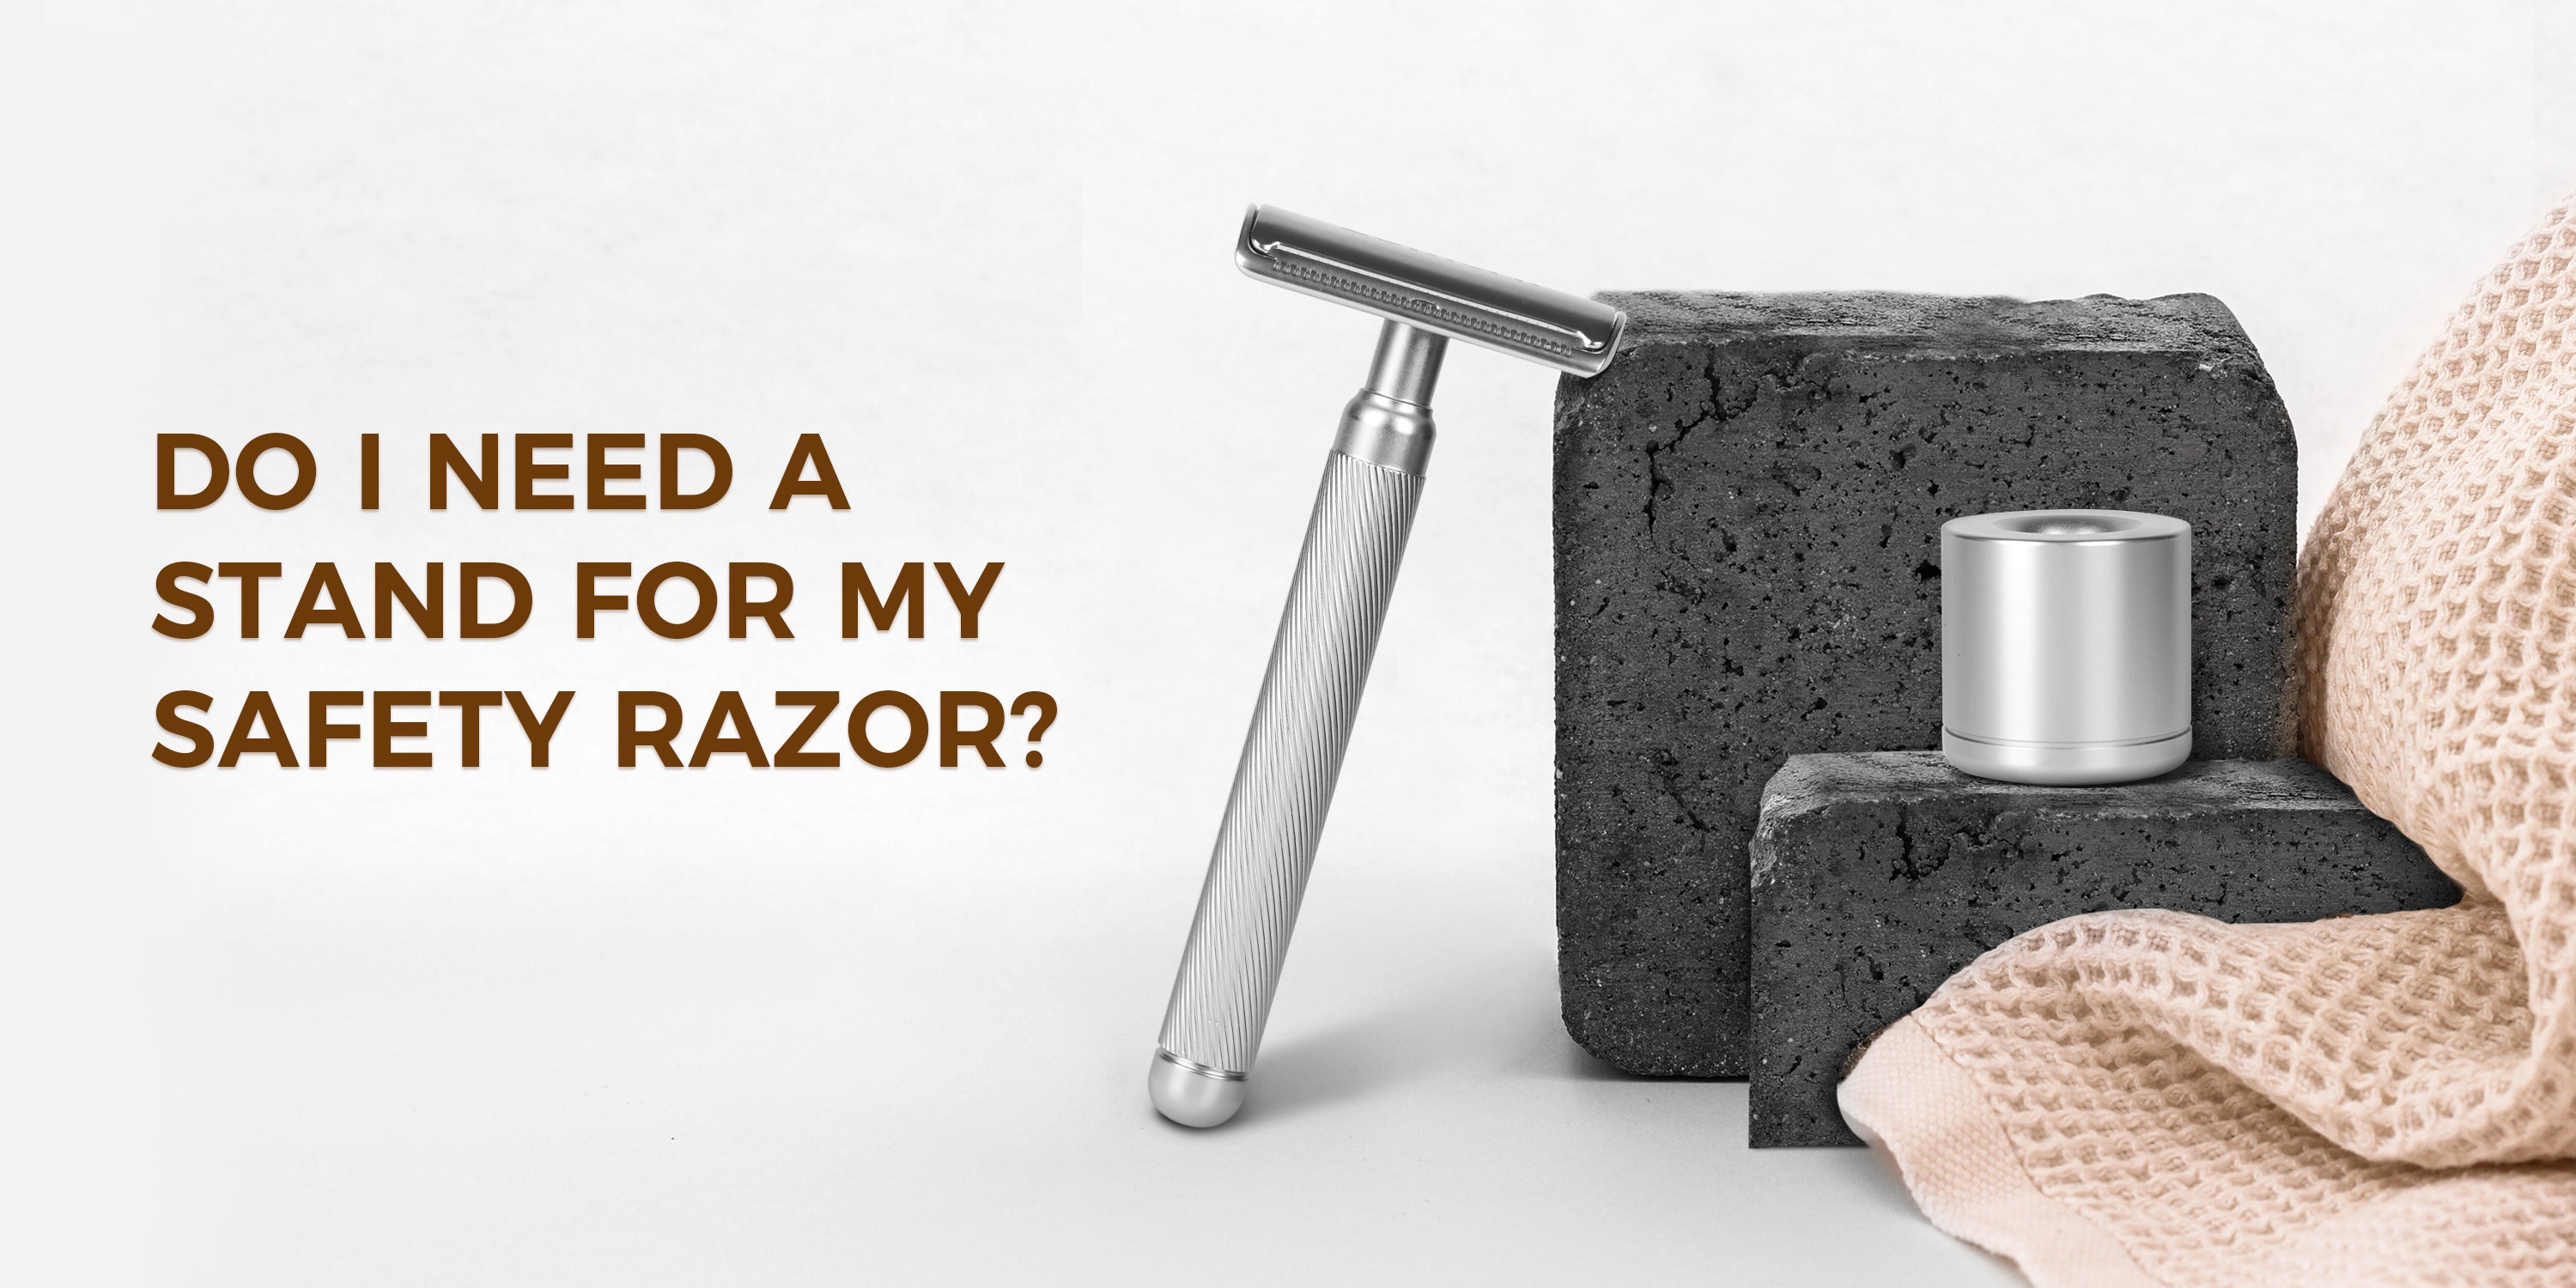 Do I Need a Stand for My Safety Razor?